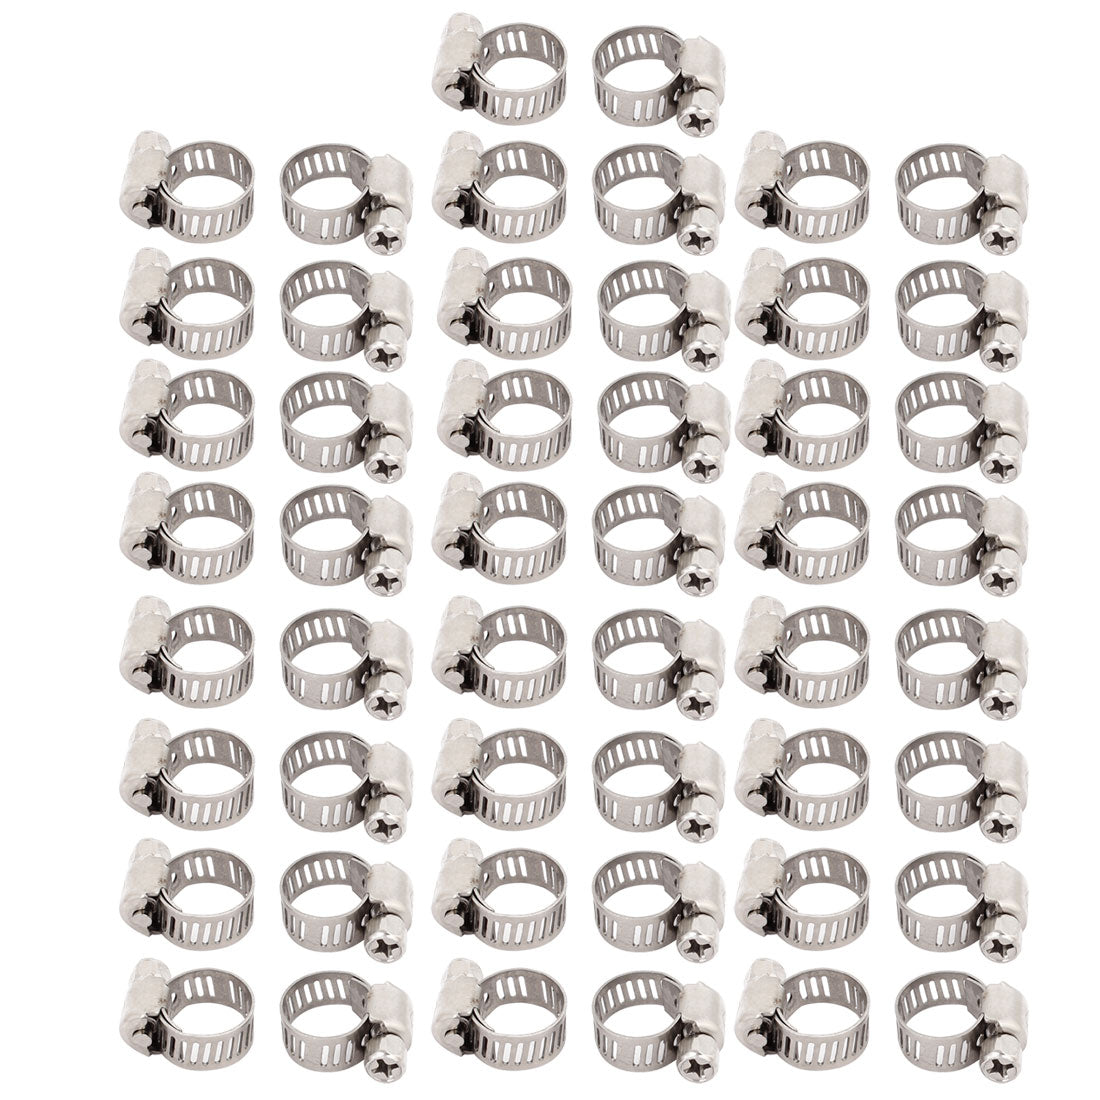 uxcell Uxcell 6mm-12mm Adjustable Range 8mm Width Stainless Steel  Gear Hose Clamp 50pcs